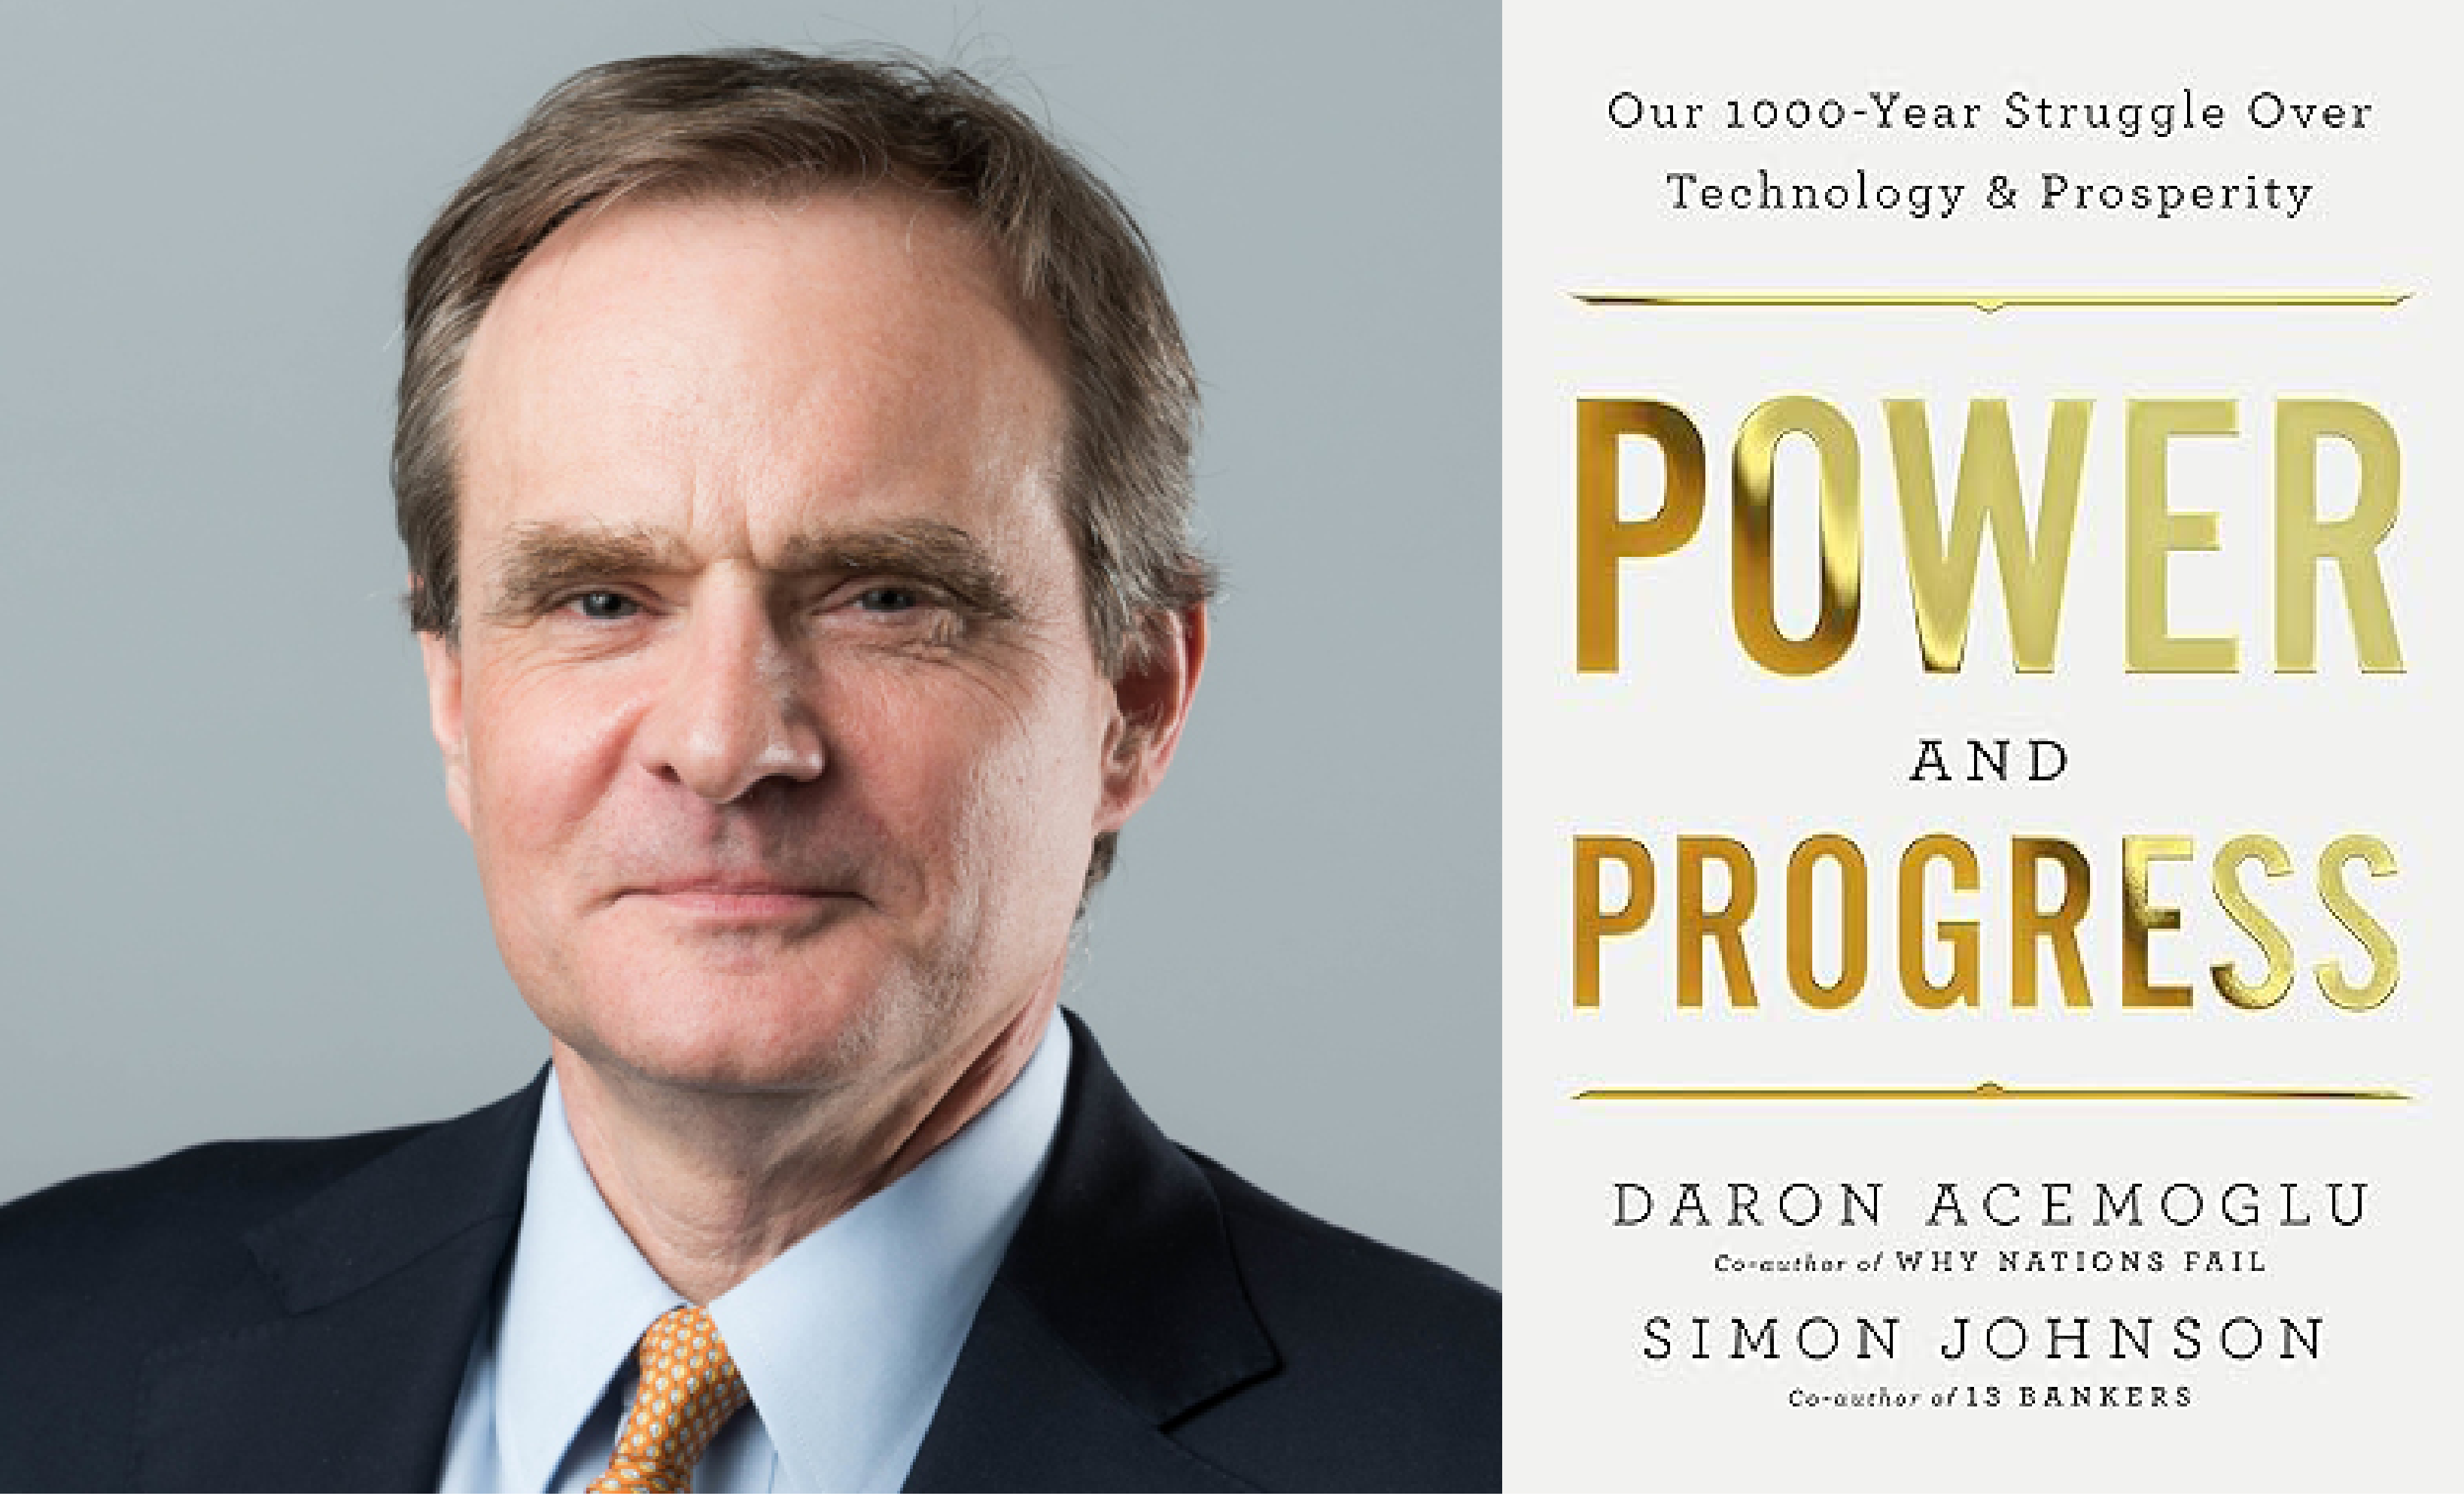 VIDEO: Simon Johnson, “Power and Progress: Our Thousand-Year Struggle Over Technology and Prosperity”